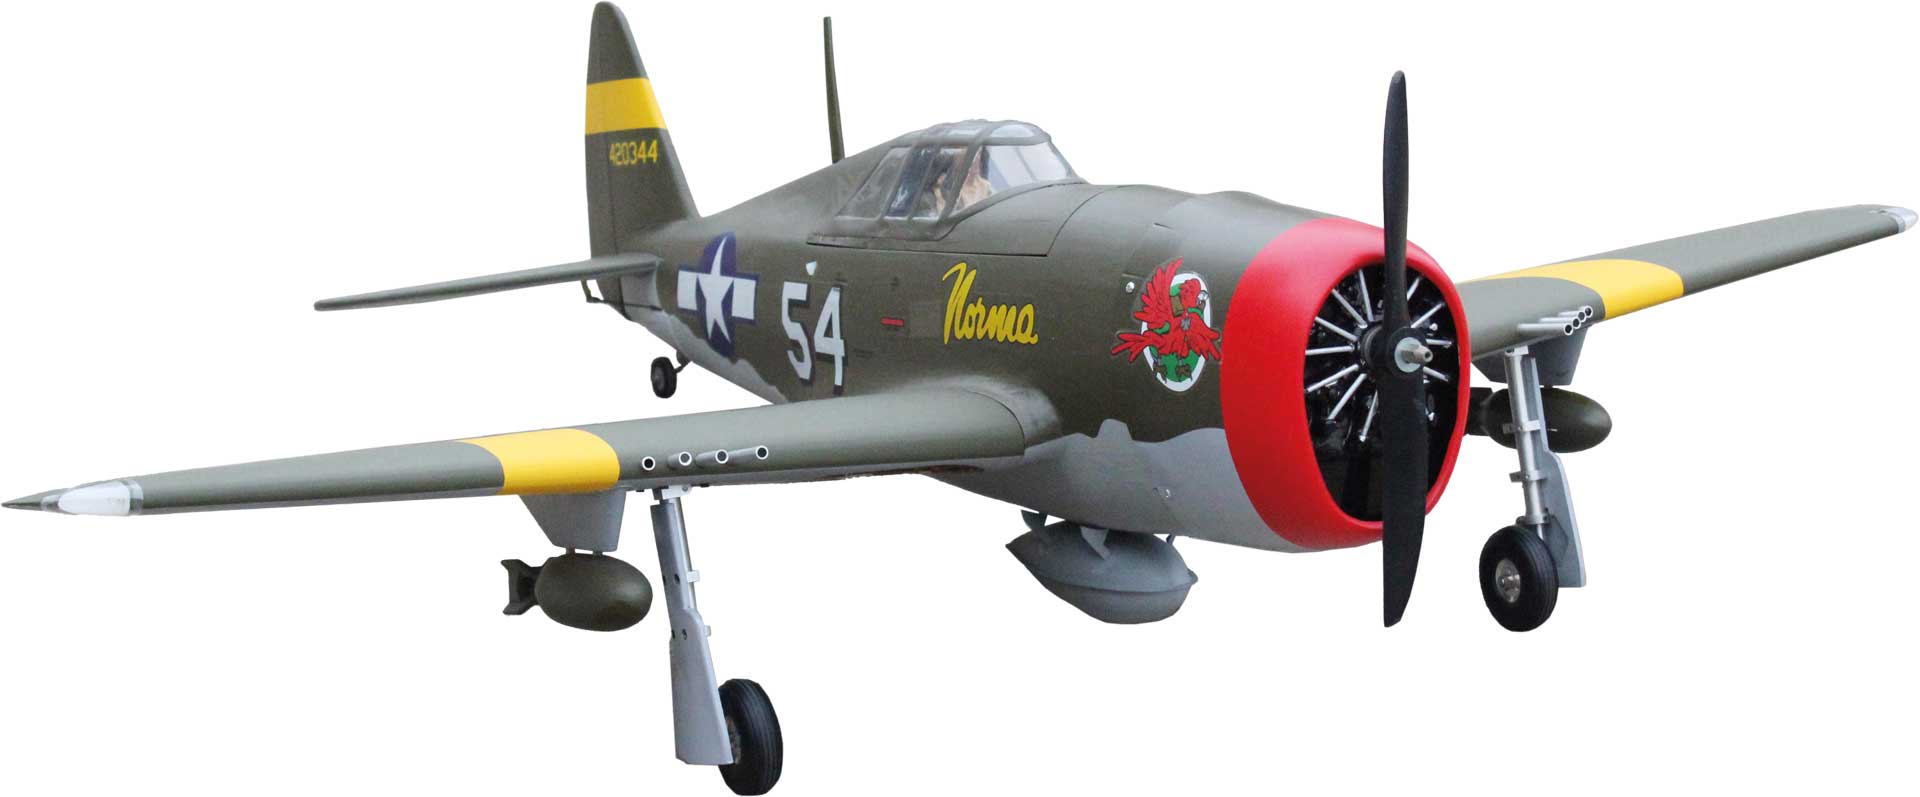 Seagull Models ( SG-Models ) P-47D Little Bunny MK-II 10cc 55" with electric retractable undercarriage ARF Warbird, matt finish